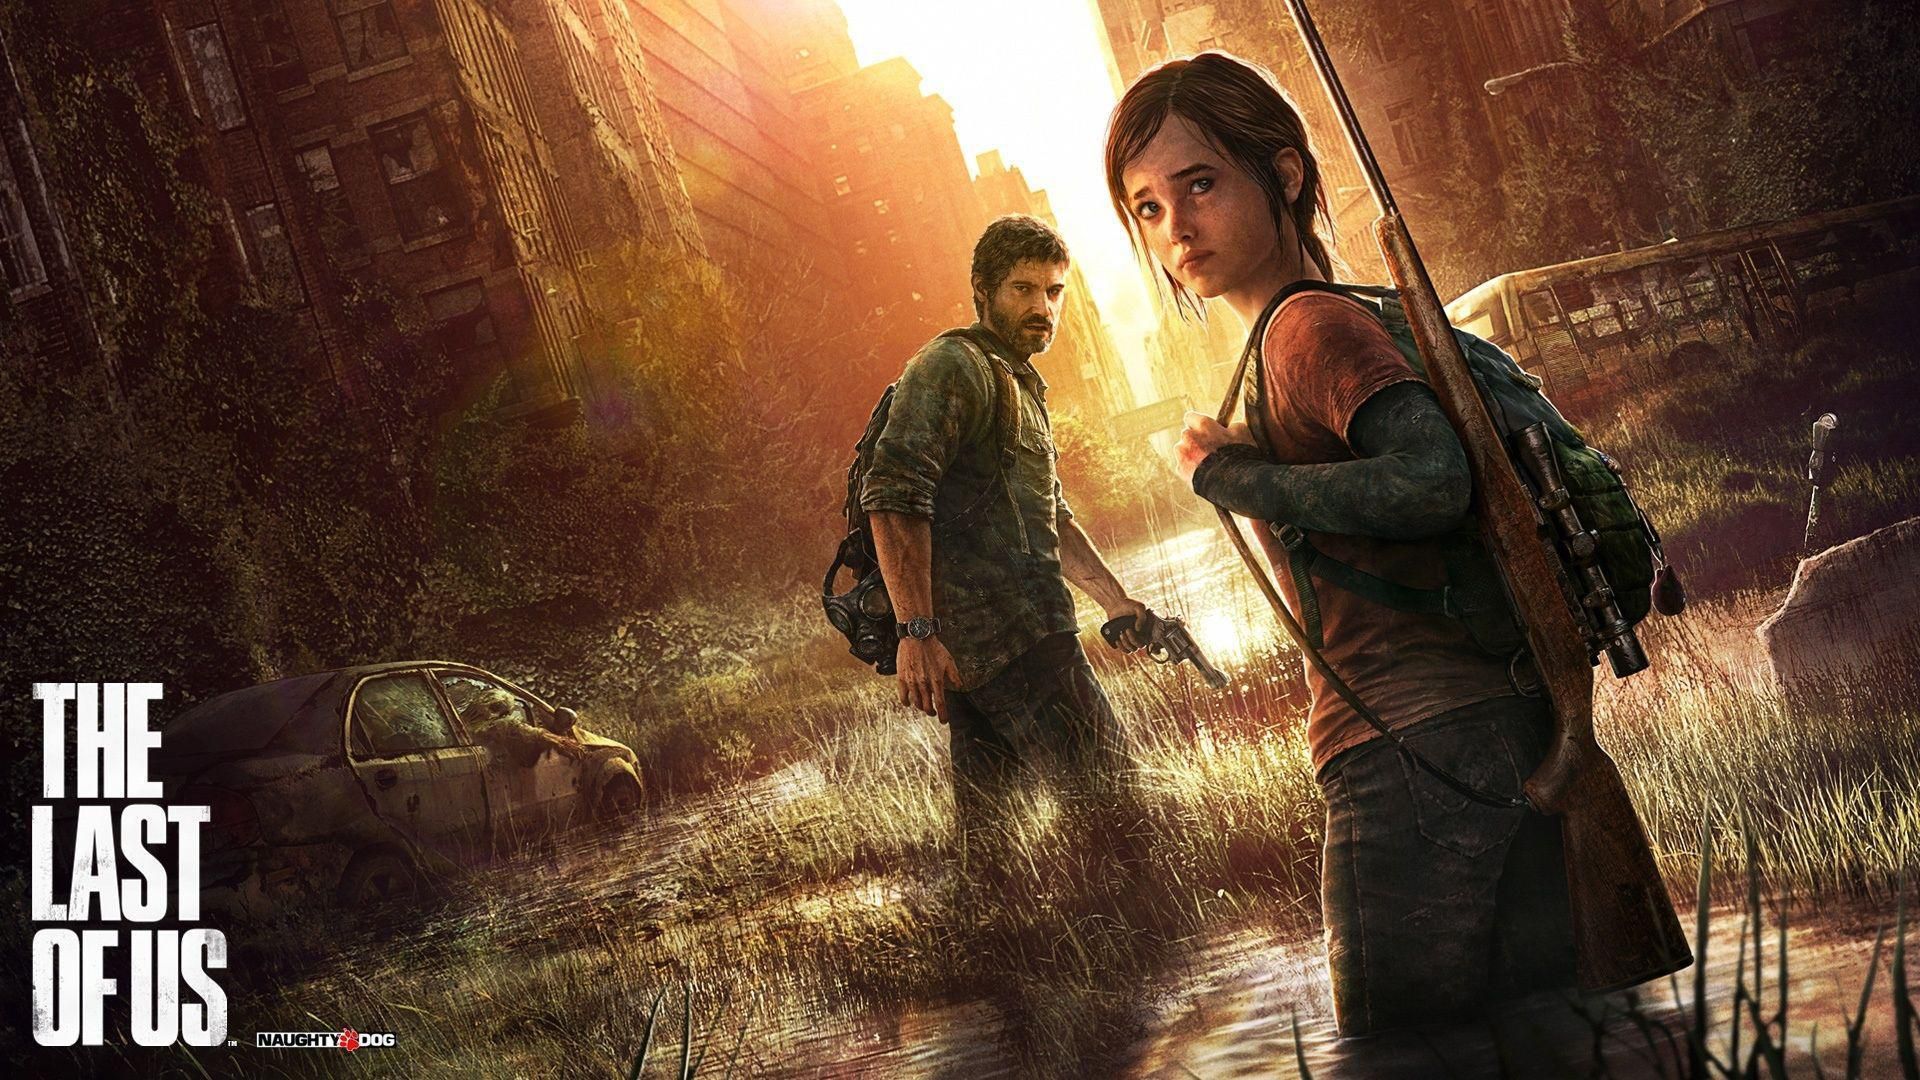 GamesBeat's 2013 Game of the Year: The Last of Us